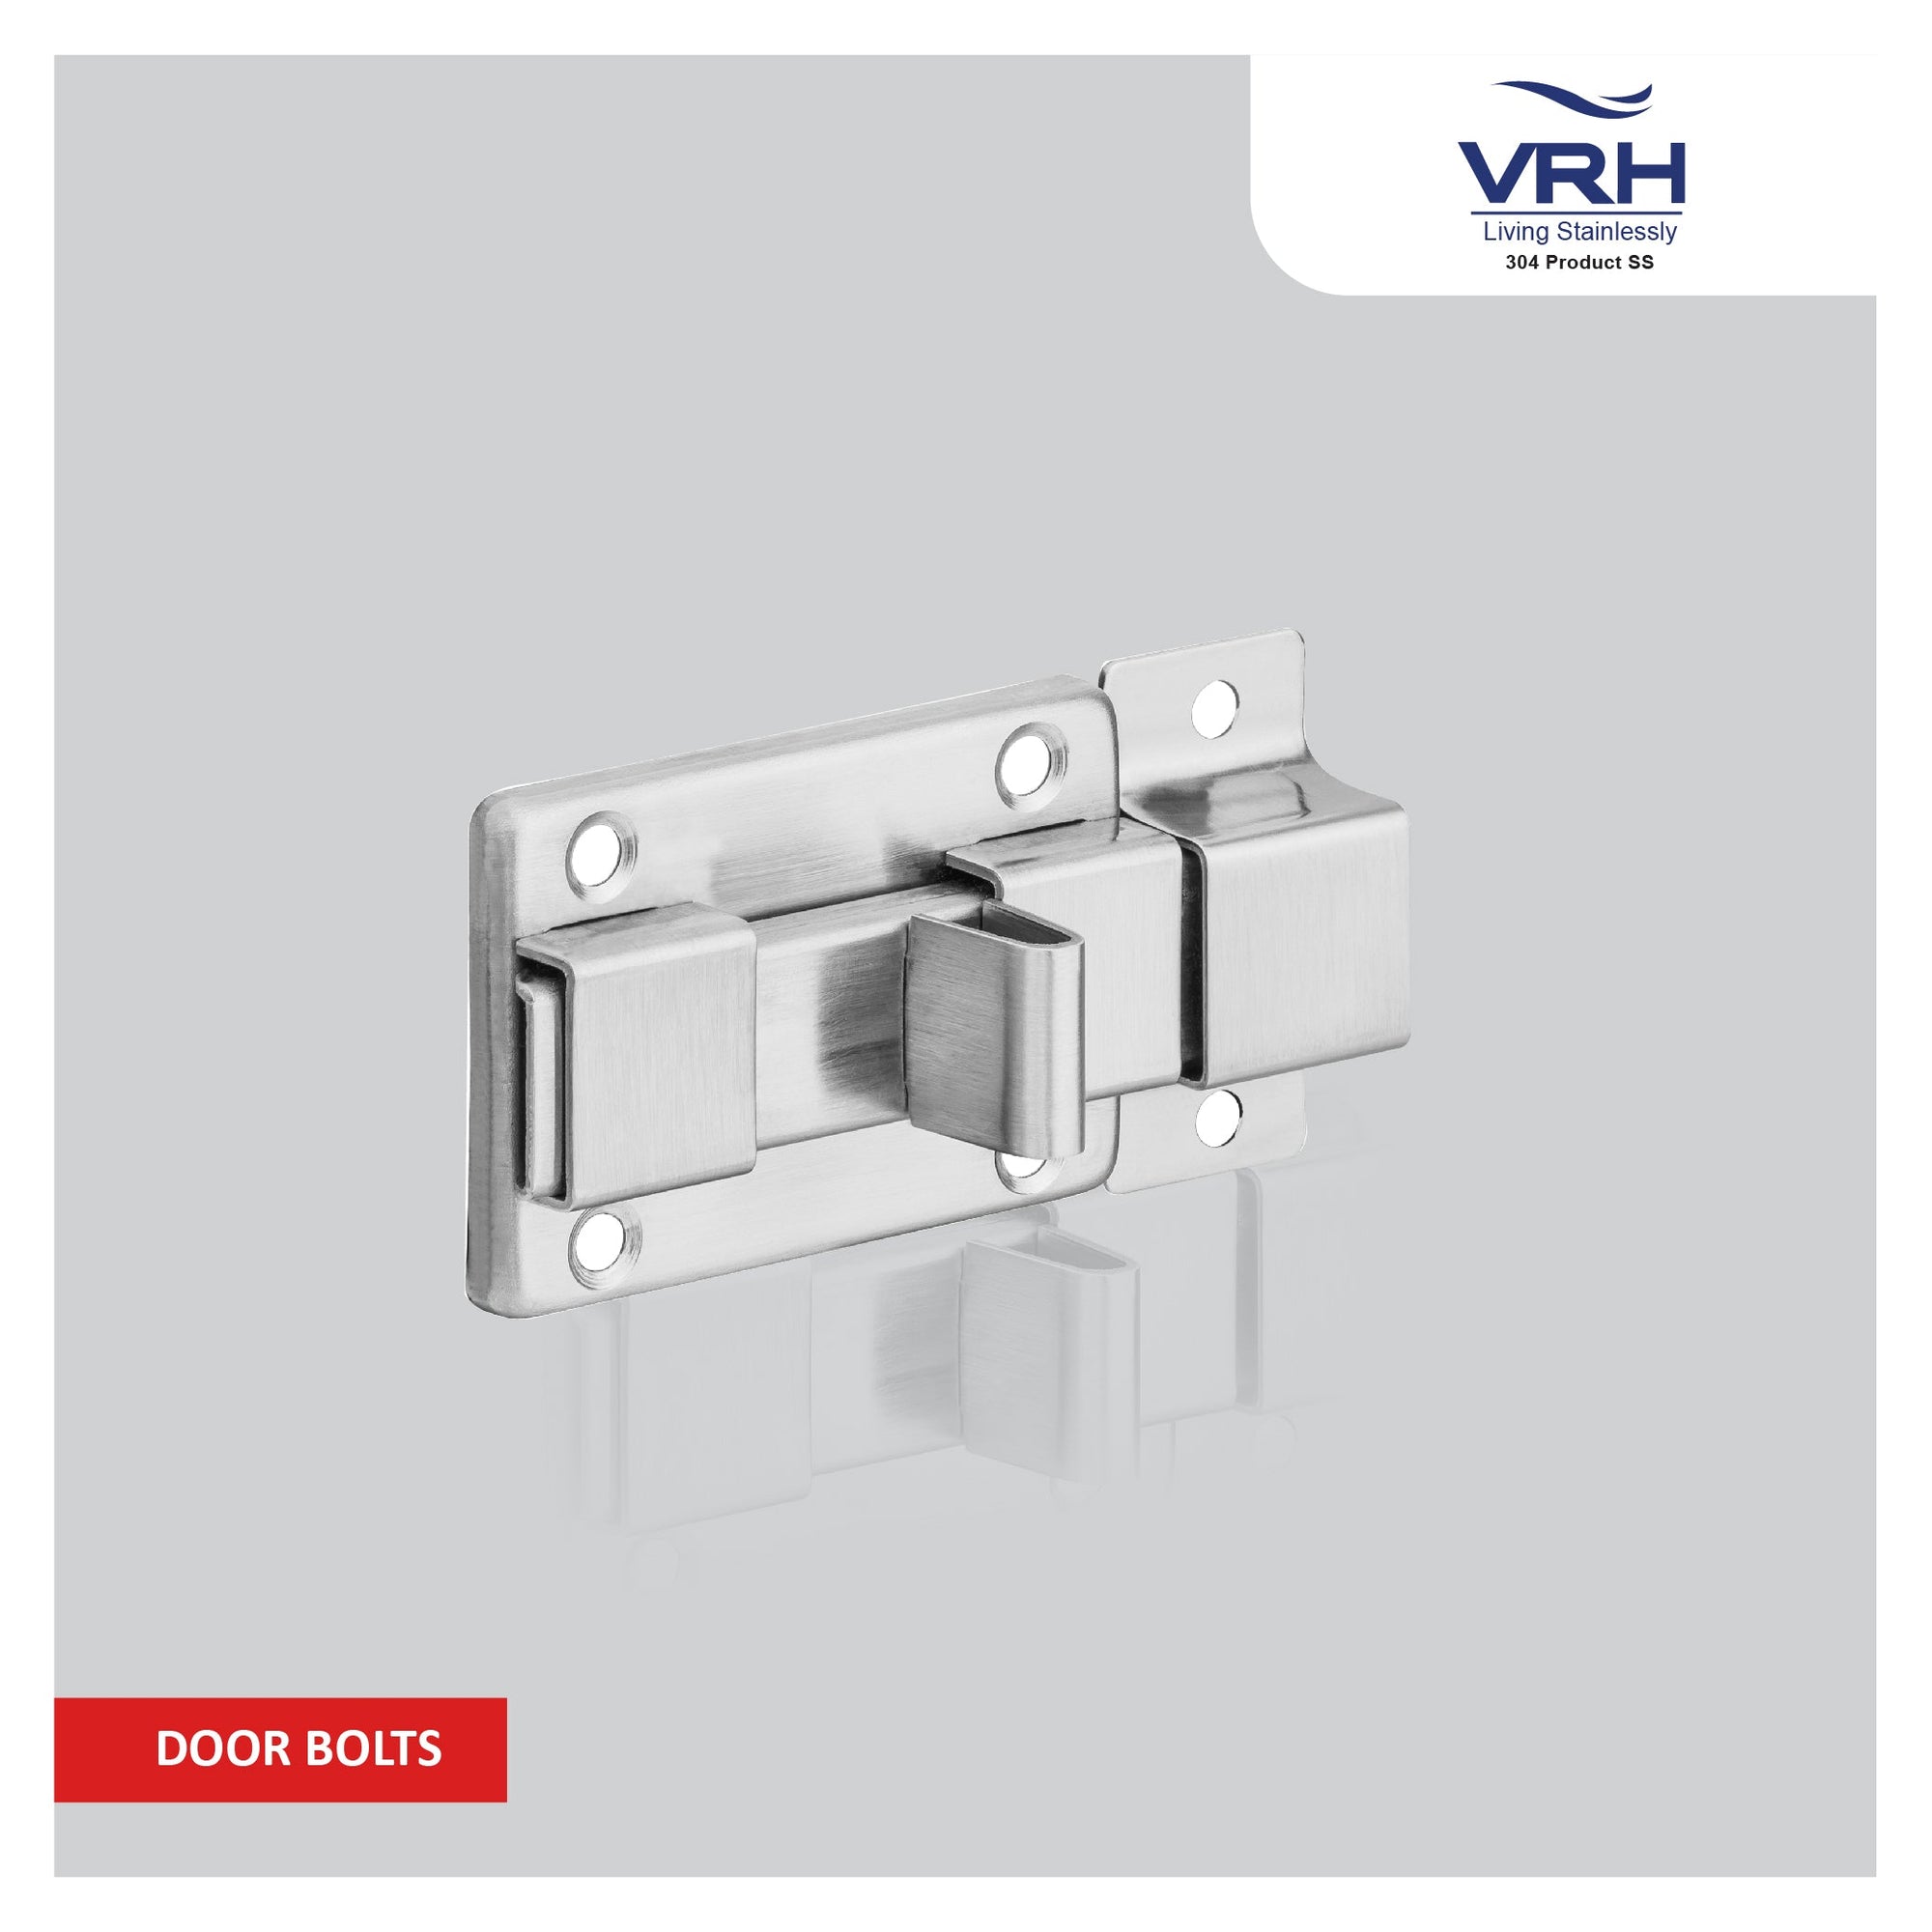 VRH Door Bolts - Secure Your Home with High-Quality Door Bolts - M. M. Noorbhoy & Co